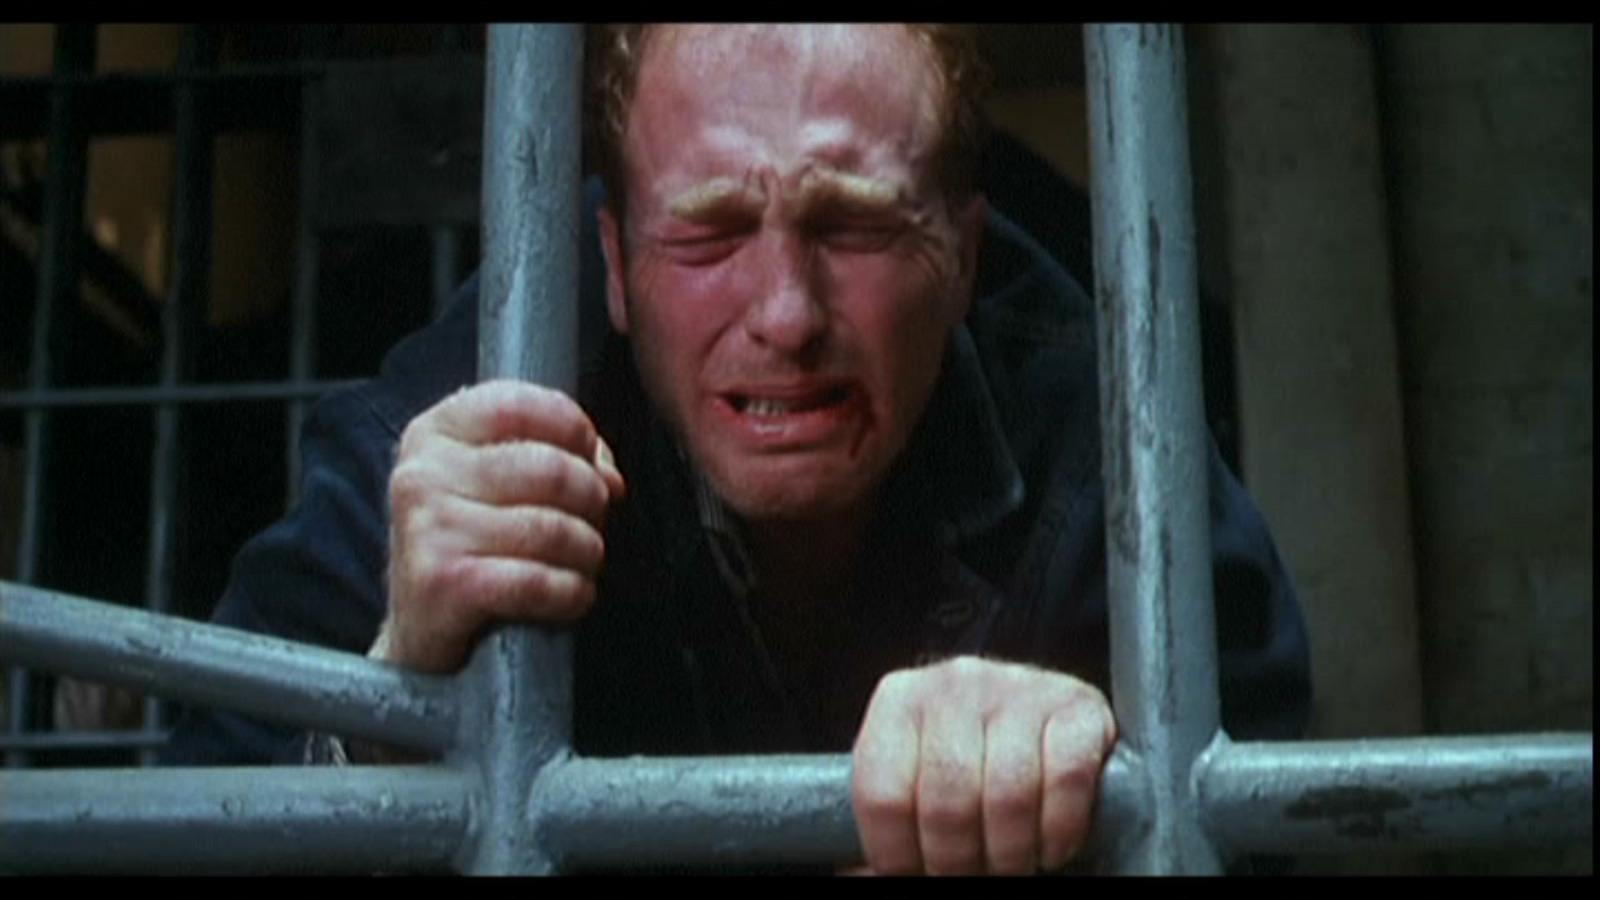 The Shawshank Redemption. Plot summary and story structure. Heywood gets a beatdown from the guards.